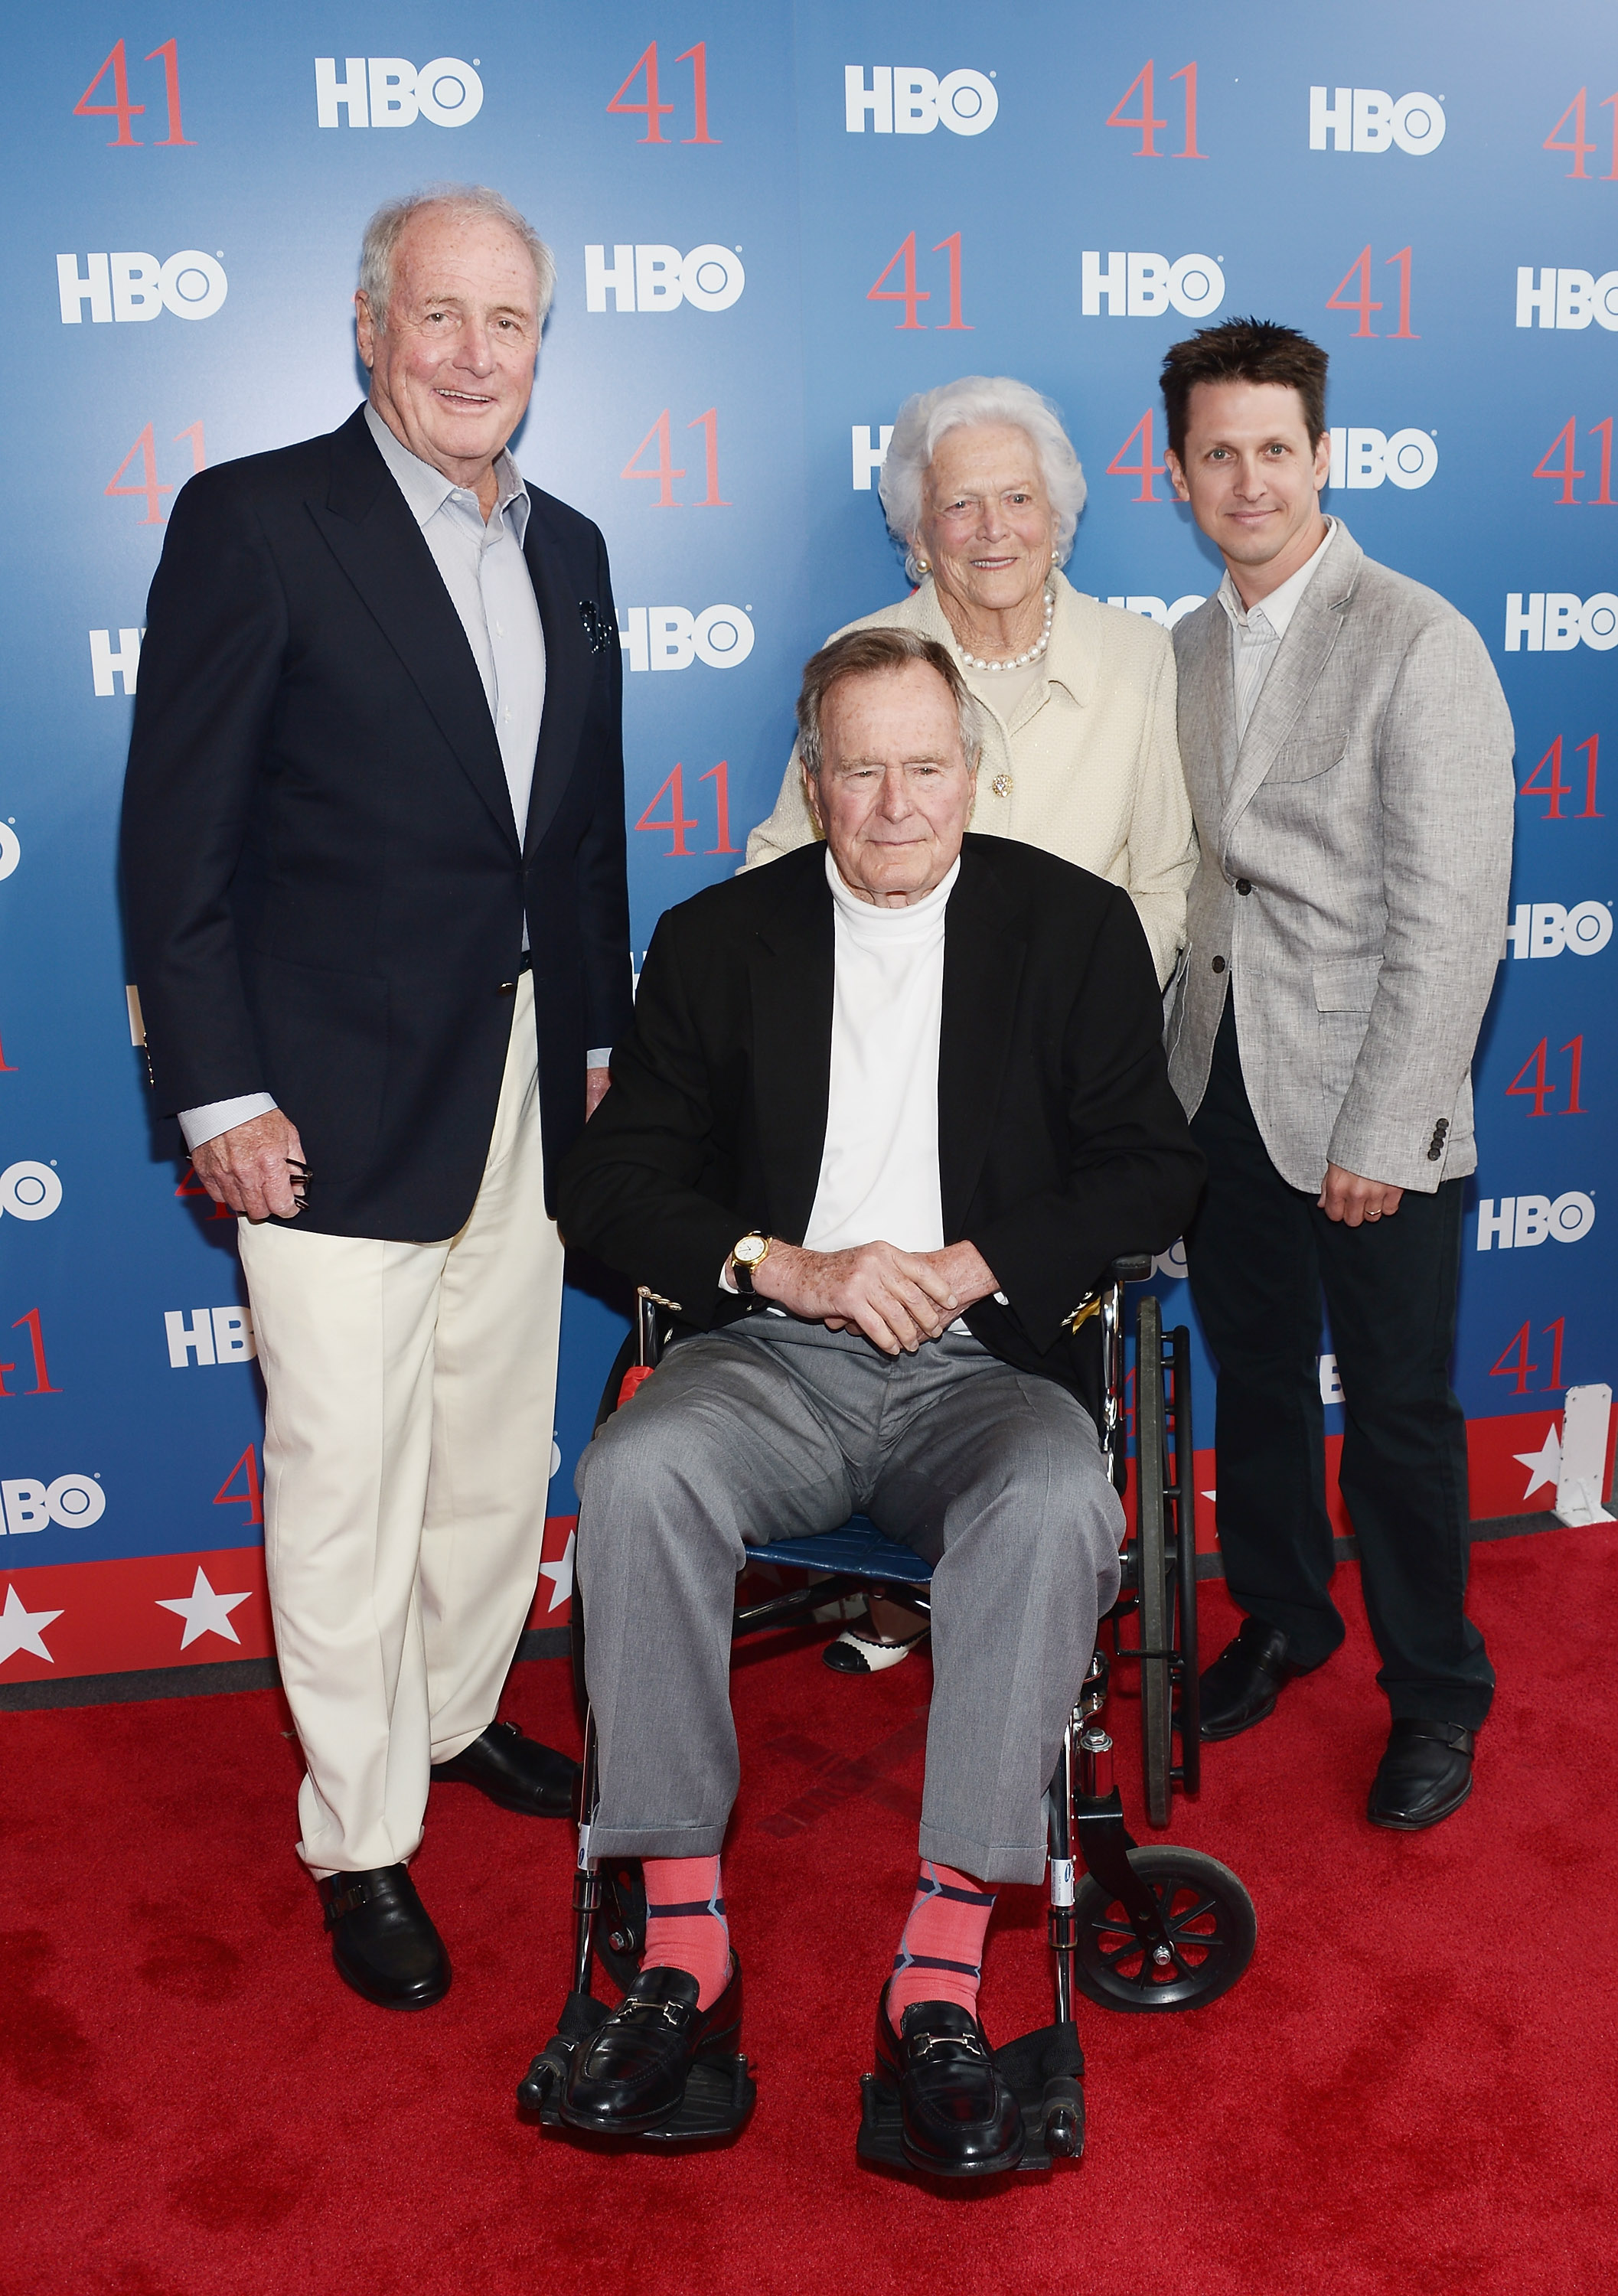 HBO Documentary Special Screening Of "41"